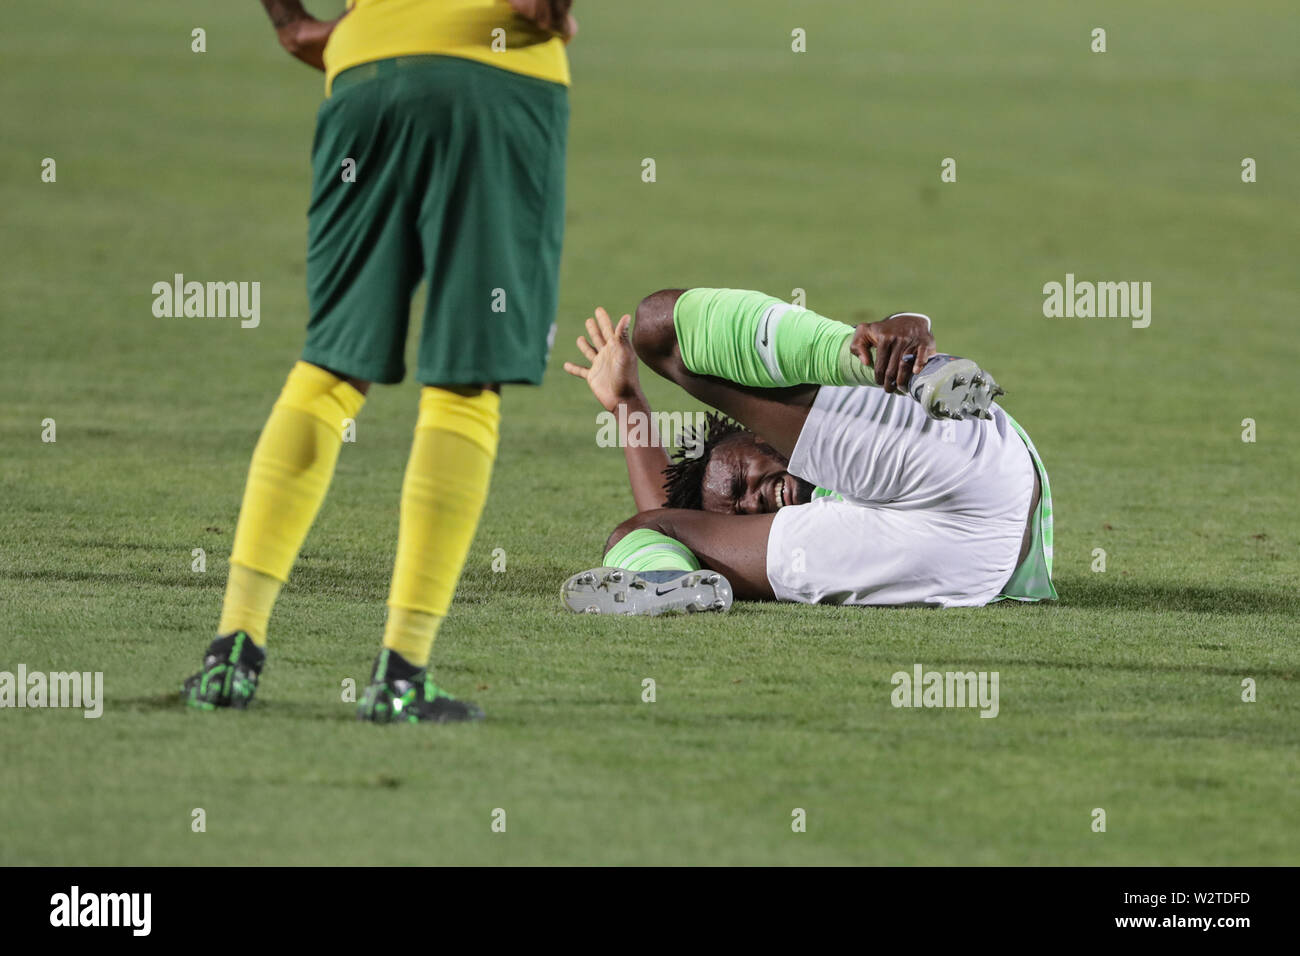 Cairo, Egypt. 10th July, 2019. Nigeria's Chidozie Awaziem reacts to an injury during the 2019 Africa Cup of Nations quarter final soccer match between Nigeria and South Africa at the Cairo International Stadium. Credit: Oliver Weiken/dpa/Alamy Live News Stock Photo